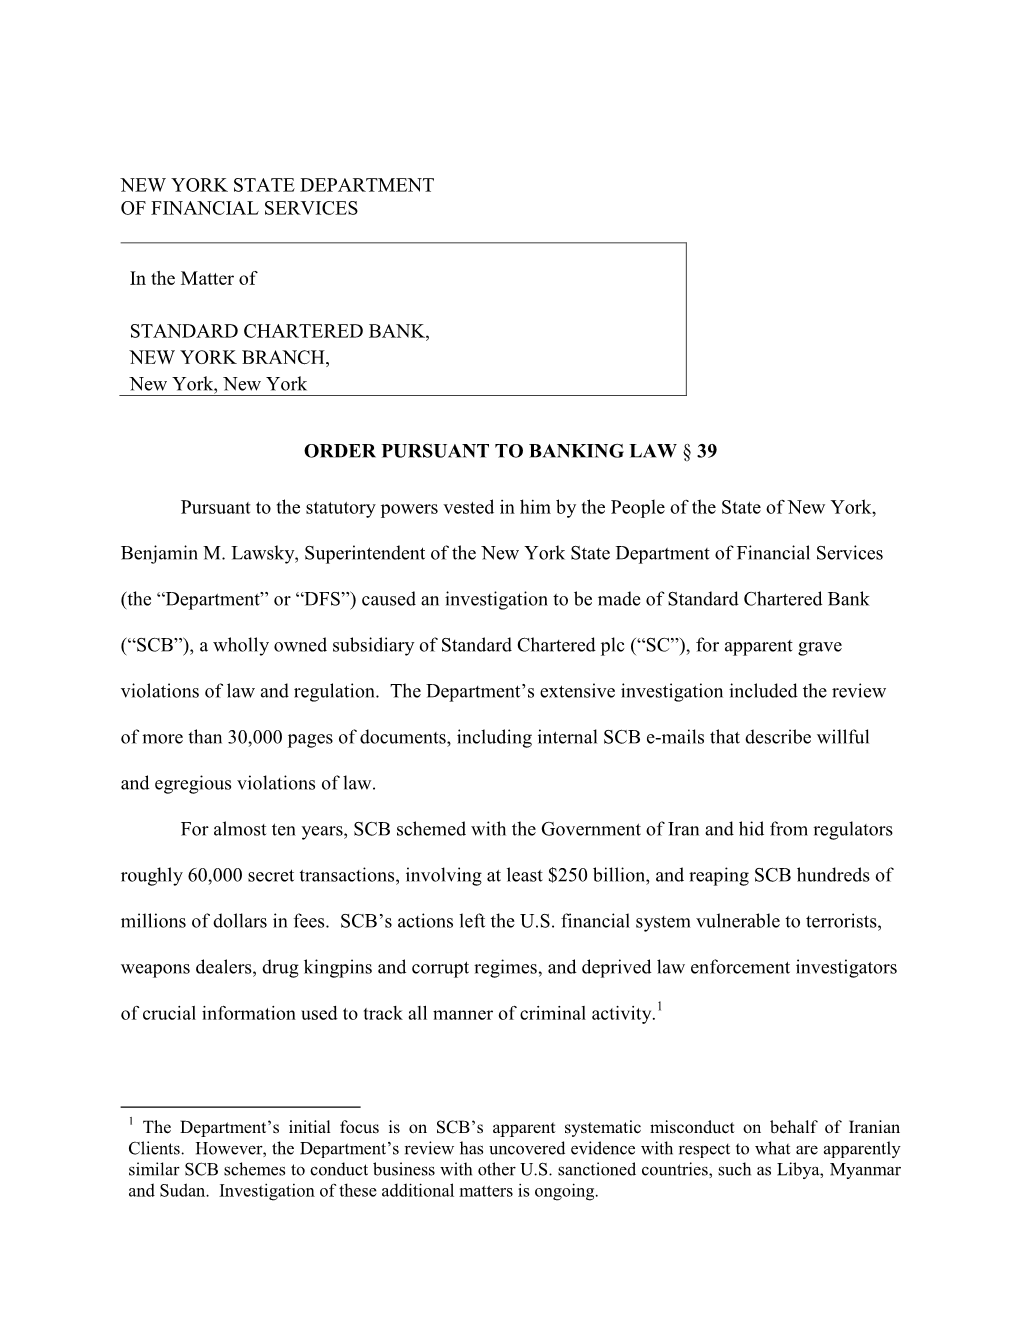 Consent Order to Standard Chartered Bank, New York Branch